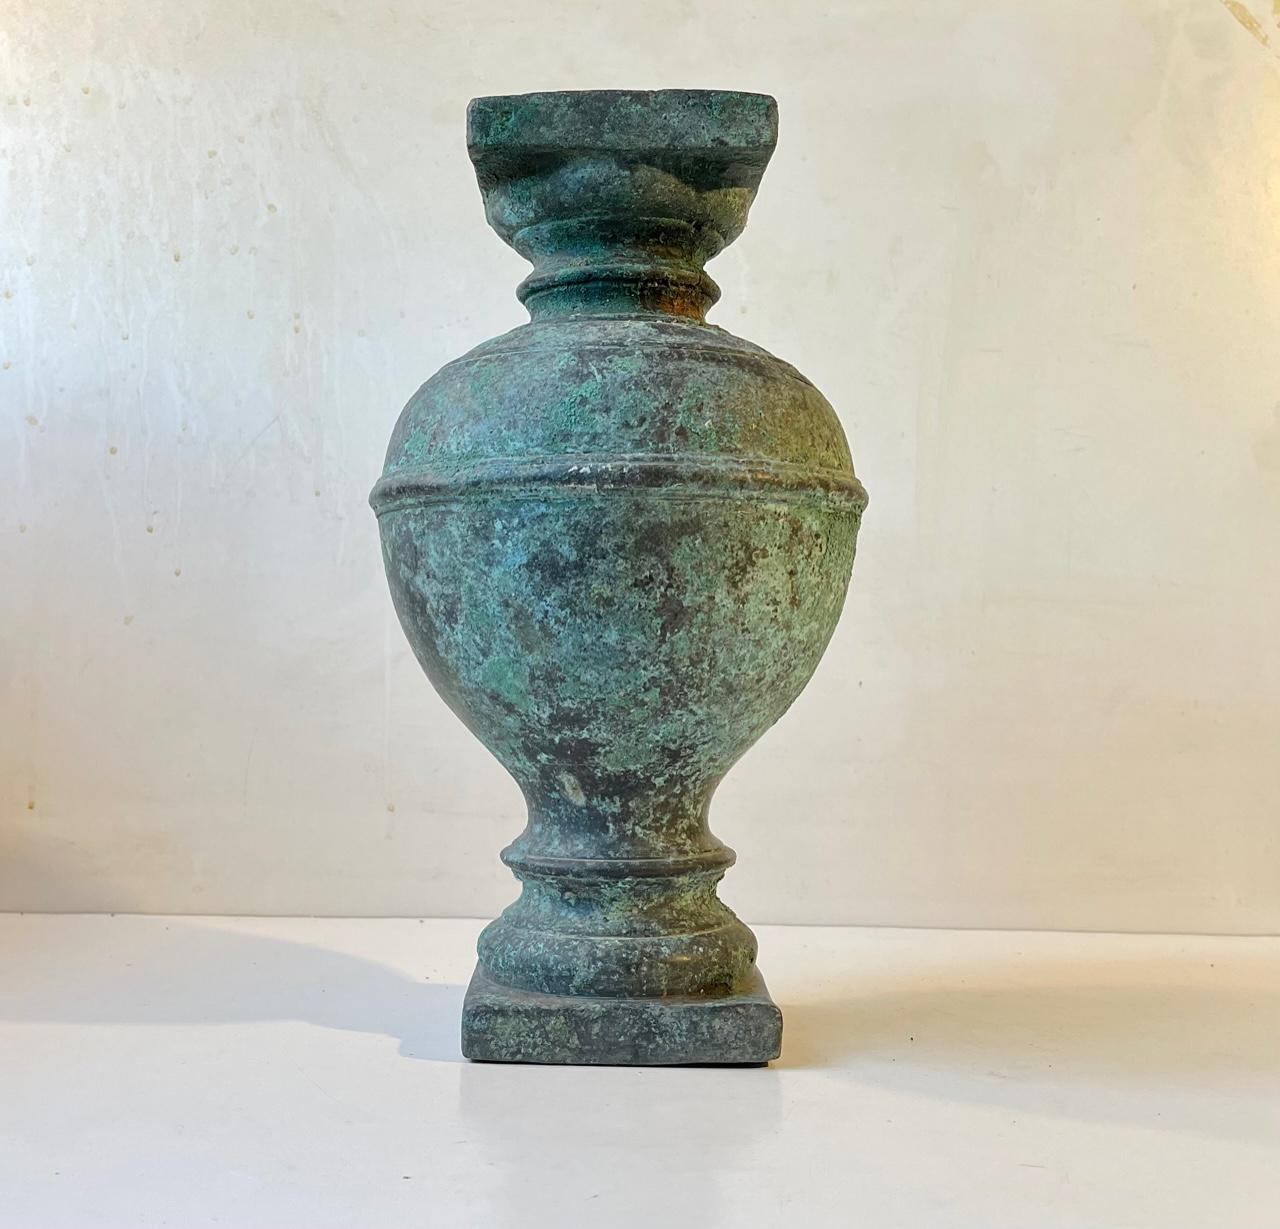 A 19th century architectural ornament in the shape of a column or pedestal. Its fashioned from solid bronze weighing in excess of 15 kg. It has patinated beautifully over the spand of time into a cascade of vibrant greens. Use it as a plant stand